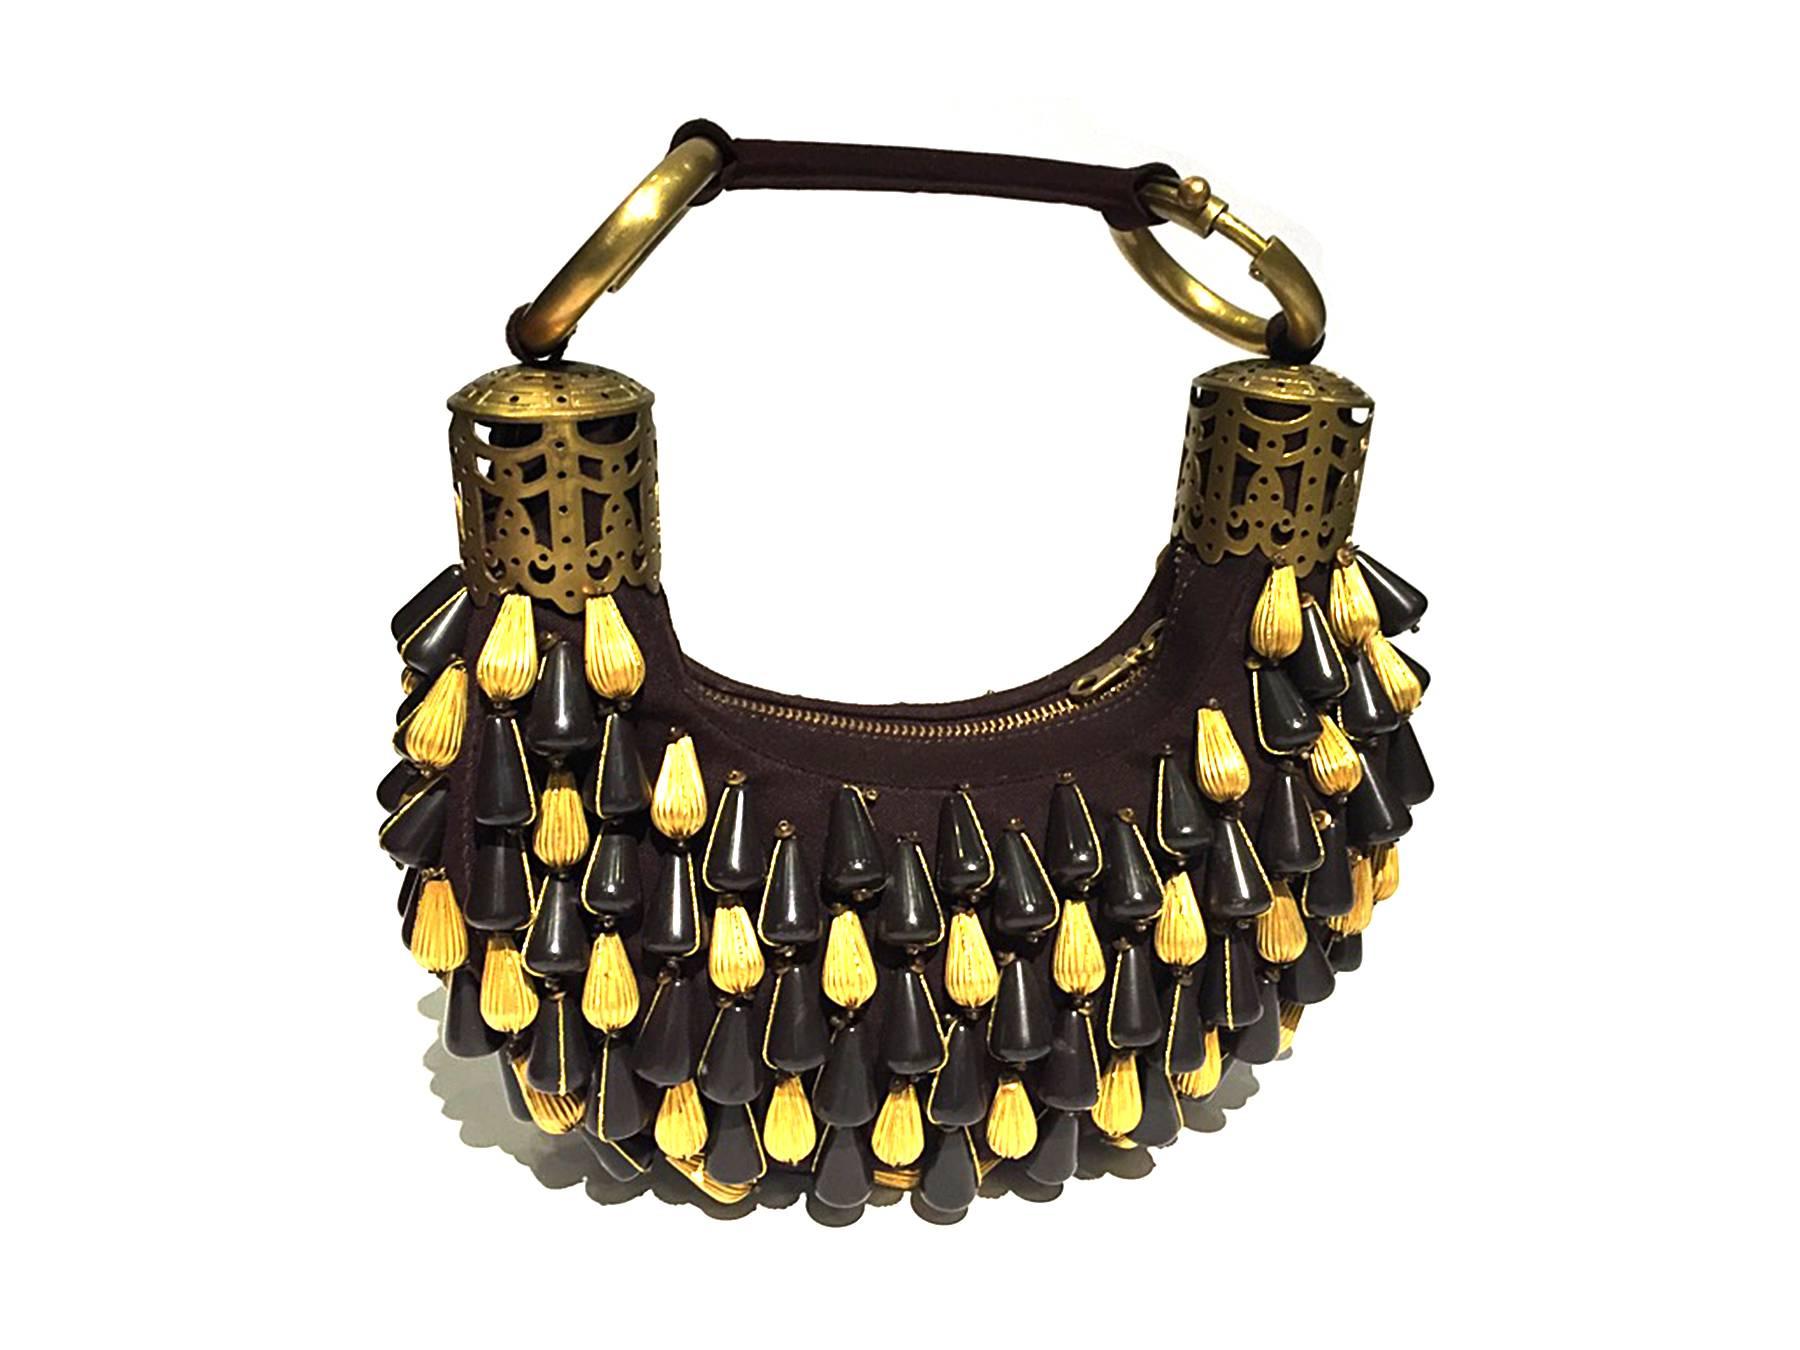 Purse has a small handle with metal lace cylinder brushed gold hardware, tear drop shaped large beads in gold and chocolate brown. A truly elegant bag for the perfect gala event. A rare master piece from the short fashion moment of Stella McCartney